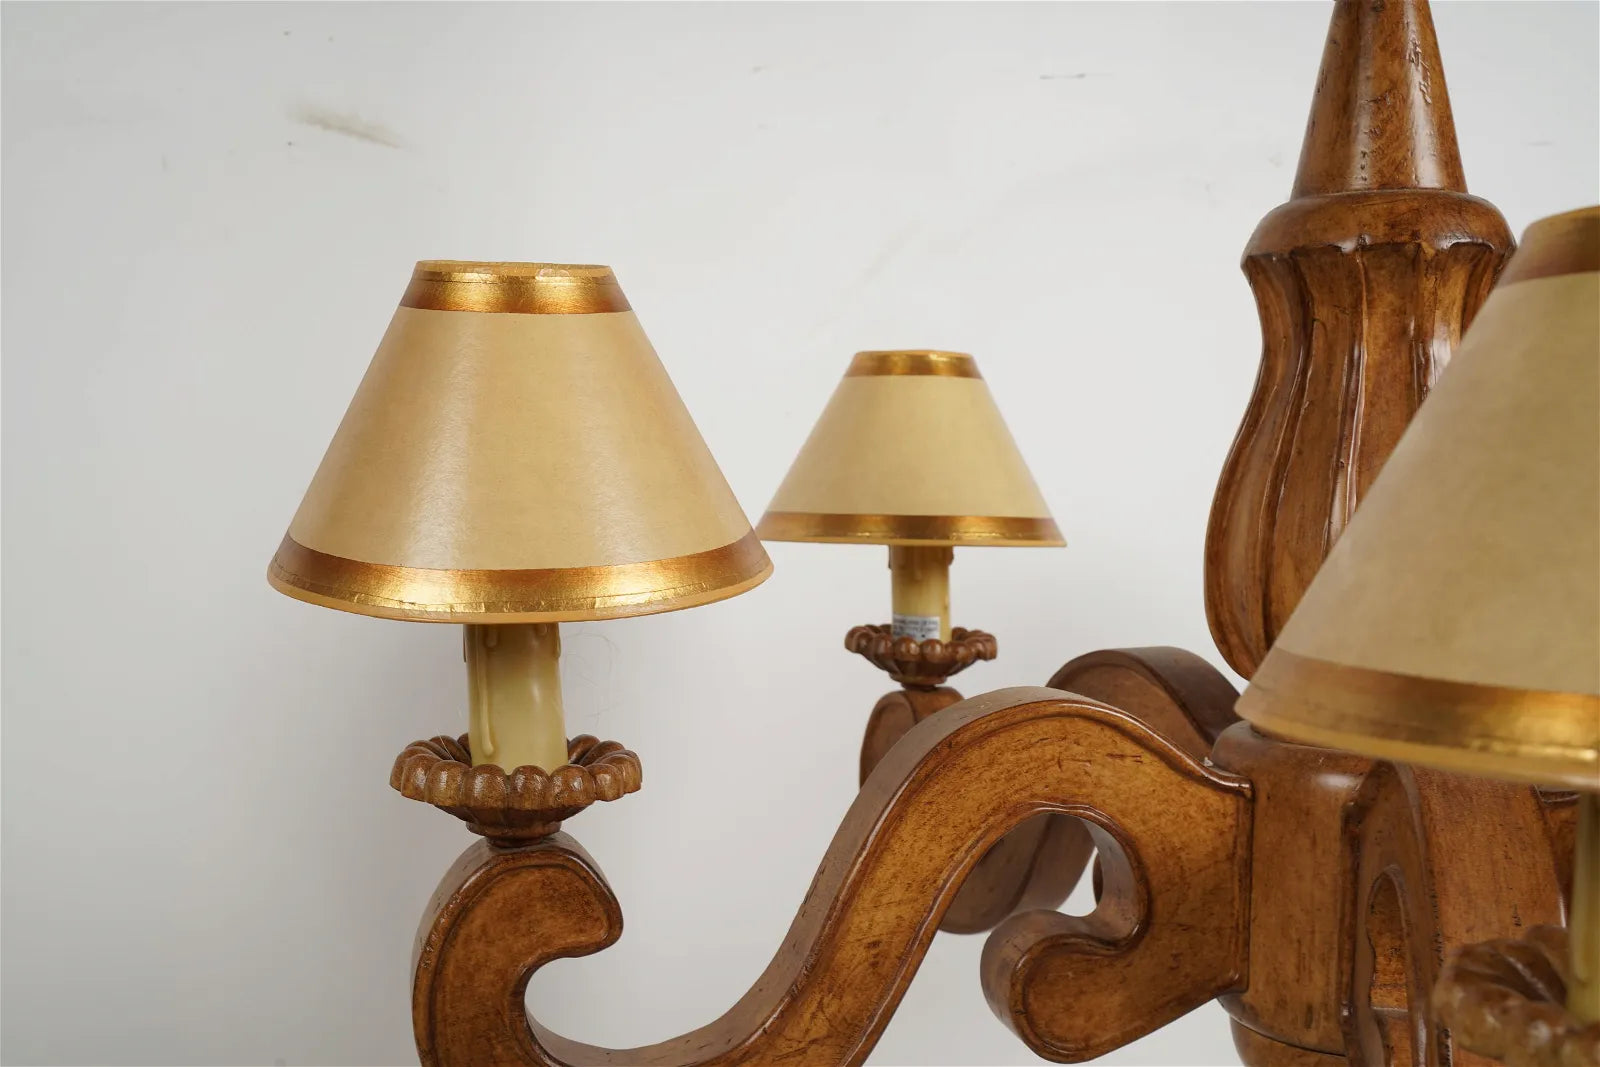 AL1-068:  Pair of Late 20th C Carved Wood 5 Light French Provincial Style Chandelier From the Larry Flynt Estate